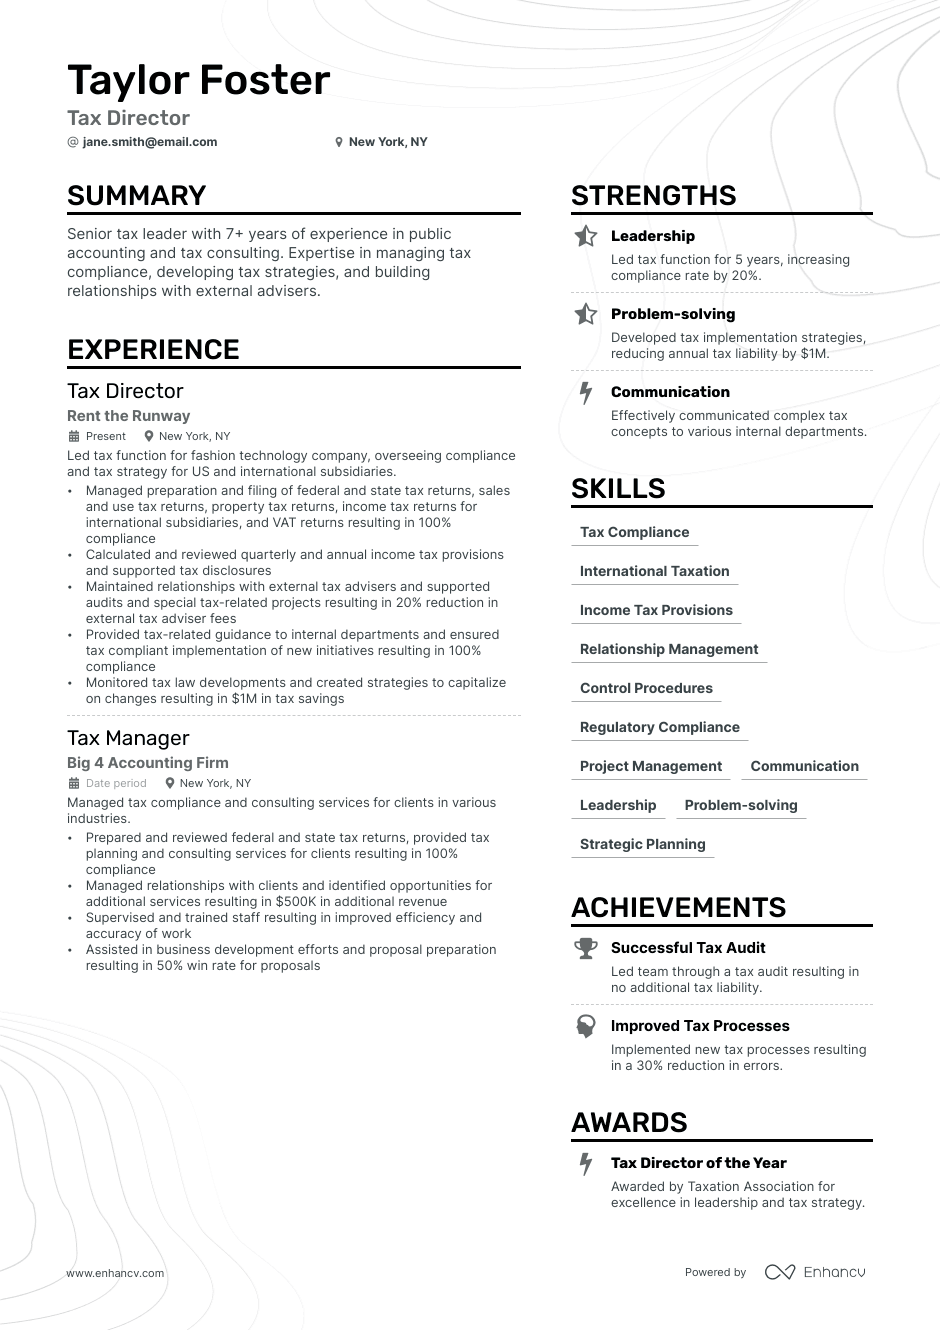 tax director resume example